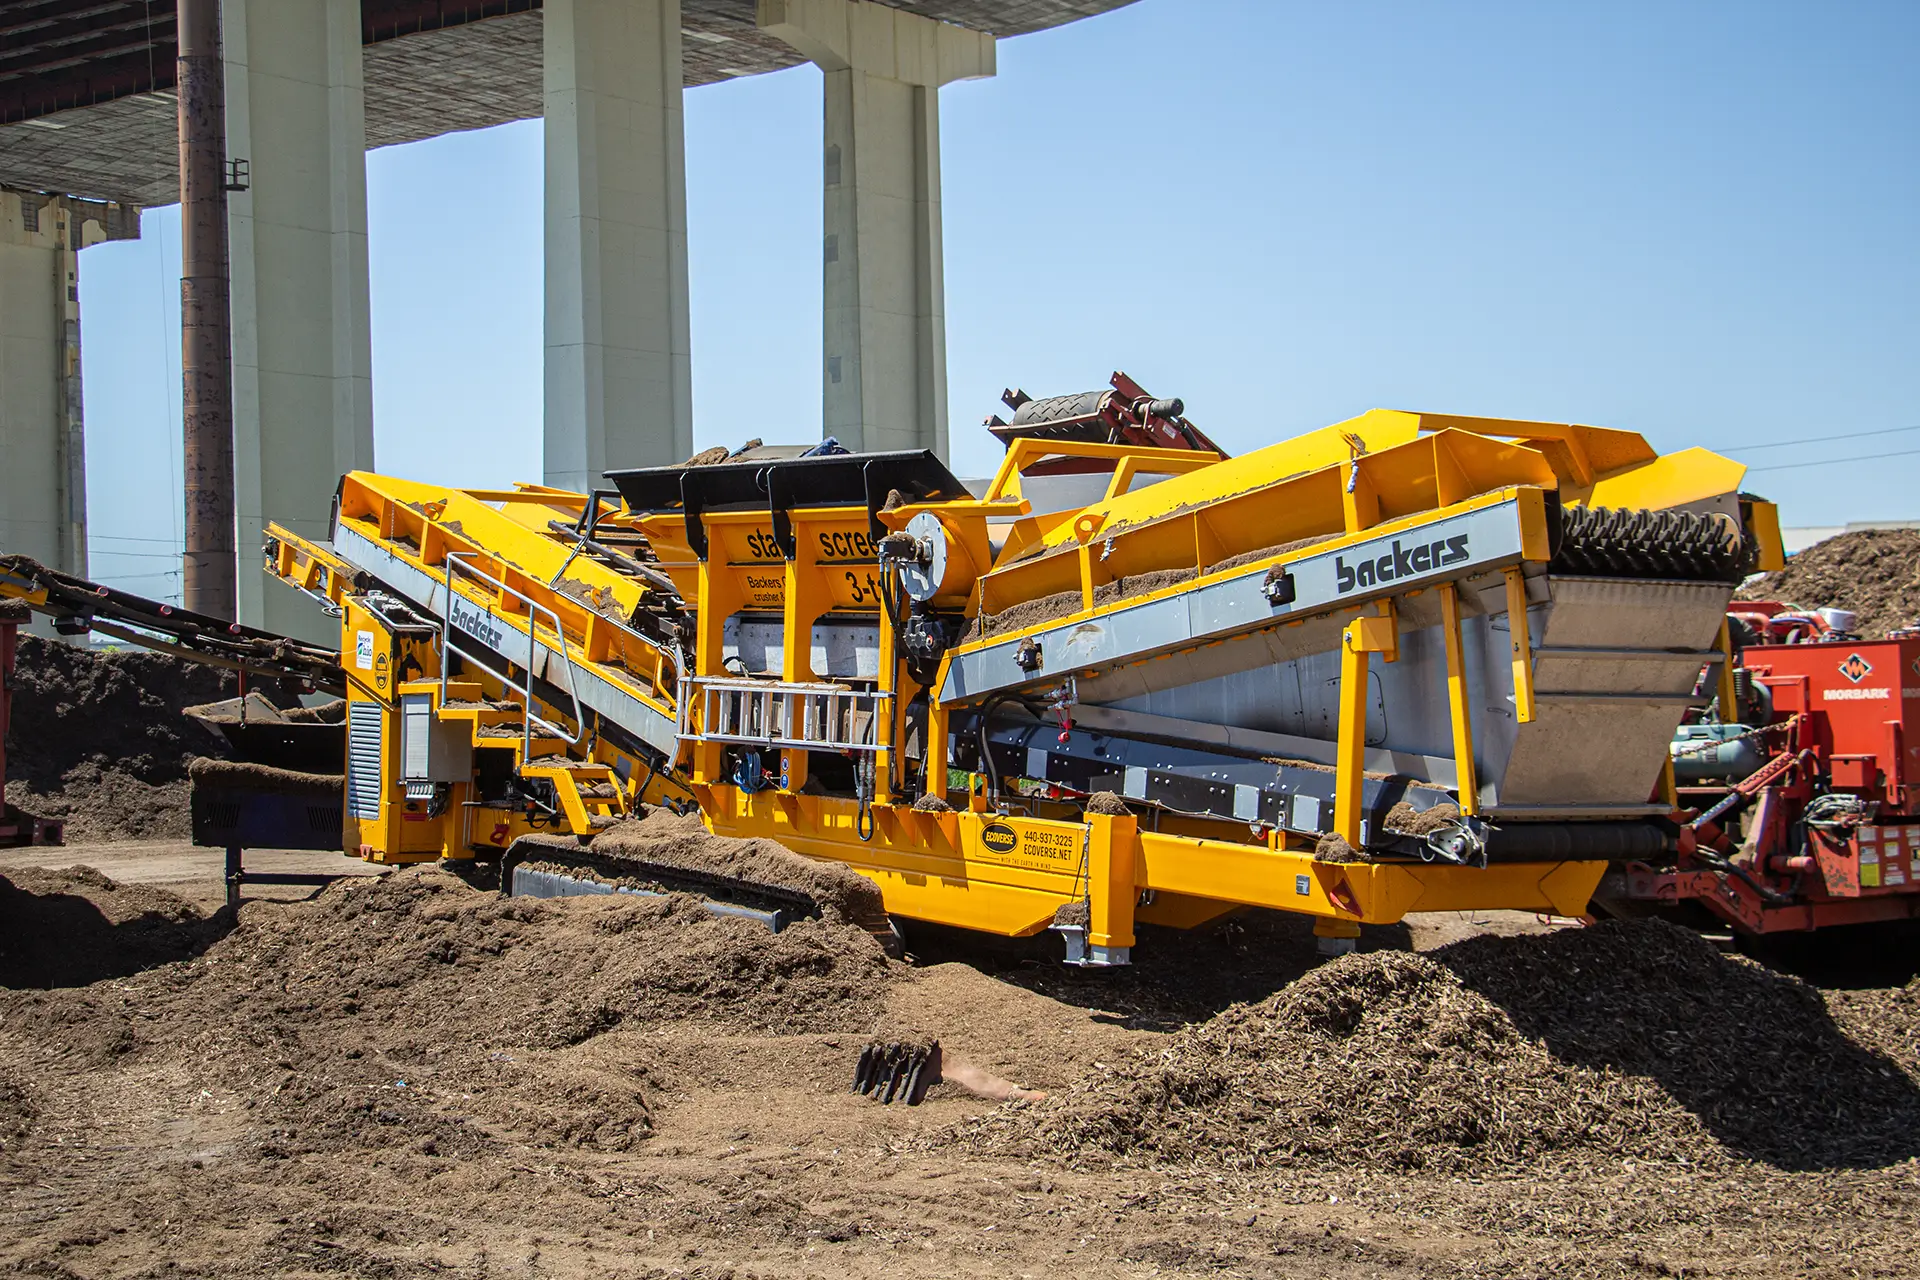 A yellow Backers star screen machine sits under a bridge as it processes and separates mulch into different sized piles.